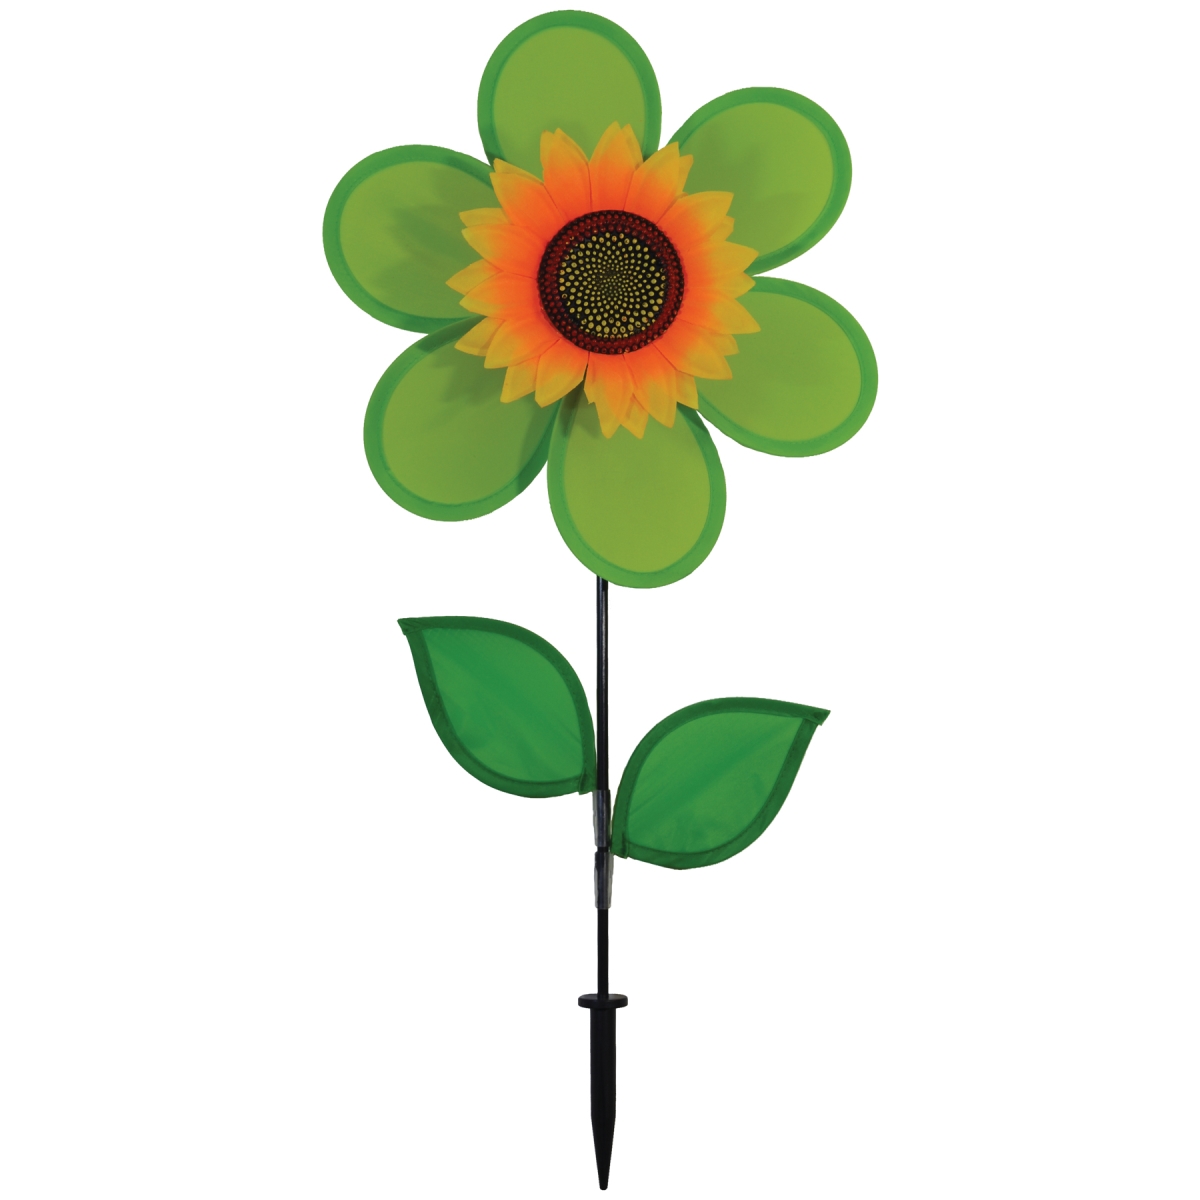 Itb2702 12 In. Green Sunflower Spinner With Leaves